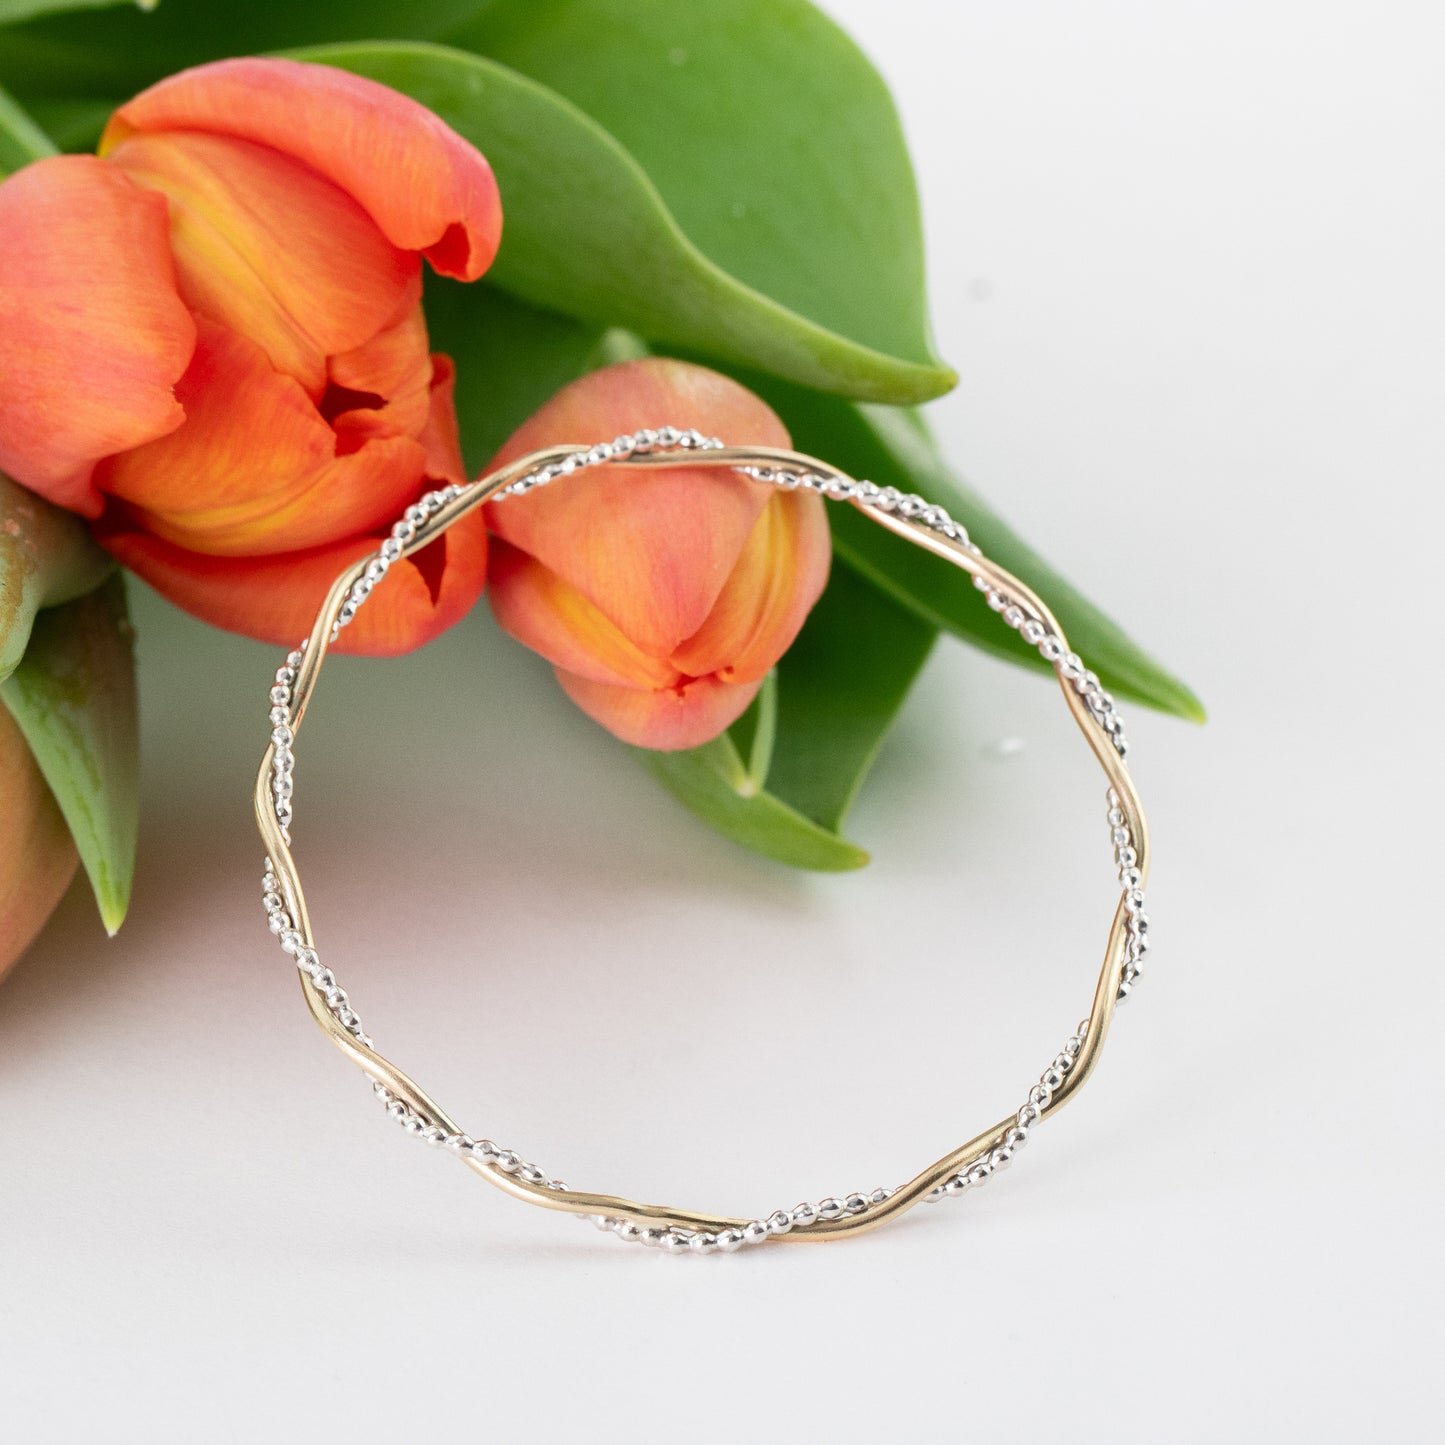 Gift for Mother from Son - Entwined Bangle - Silver & 9kt Gold